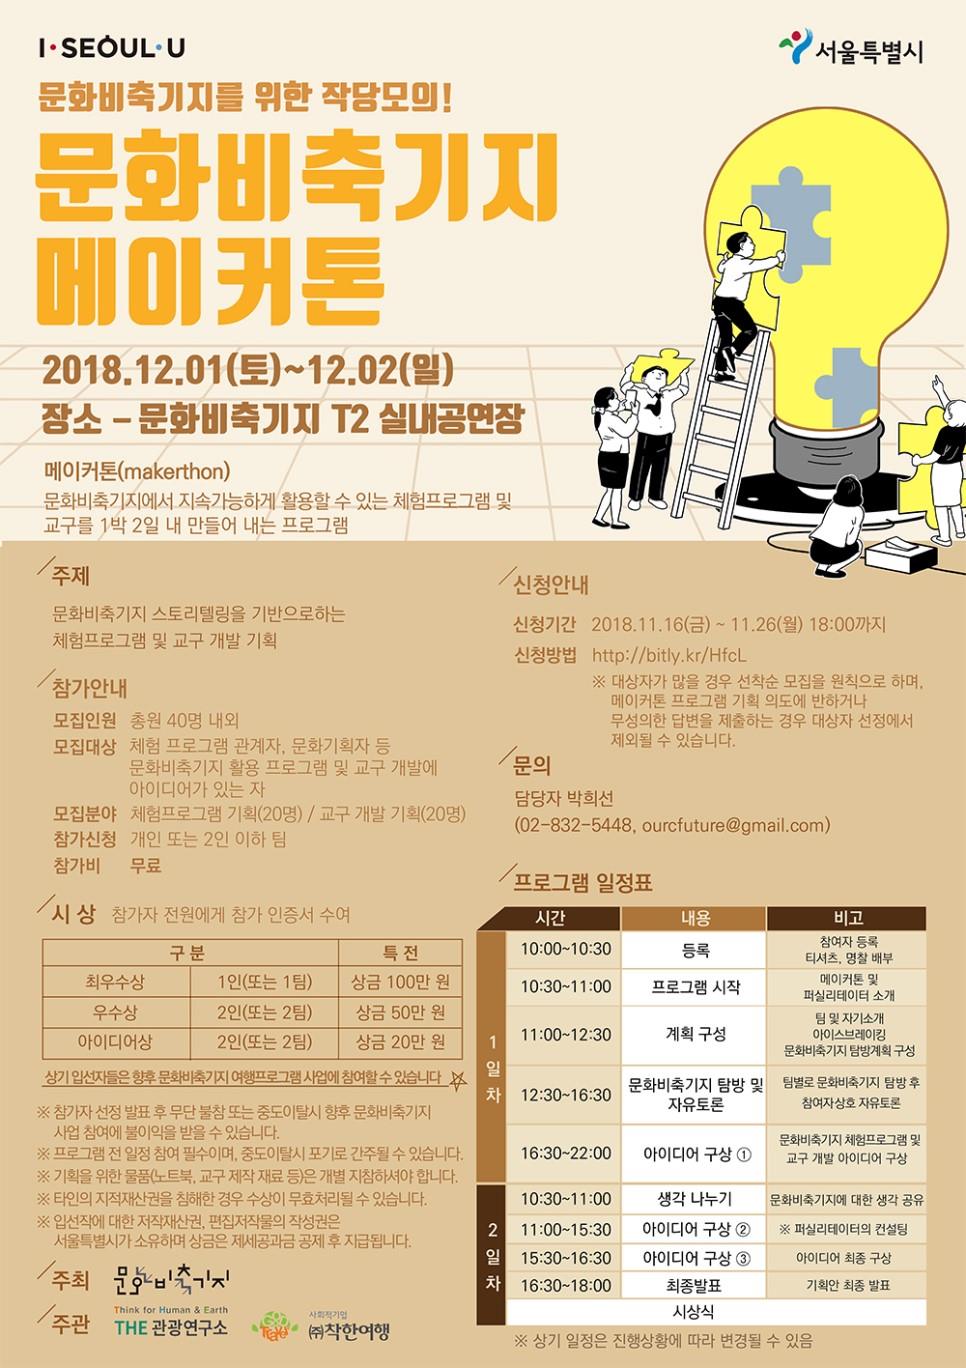 You are currently viewing 문화비축기지, 체험콘텐츠 발굴 _메이커톤_…40명 시민 모집